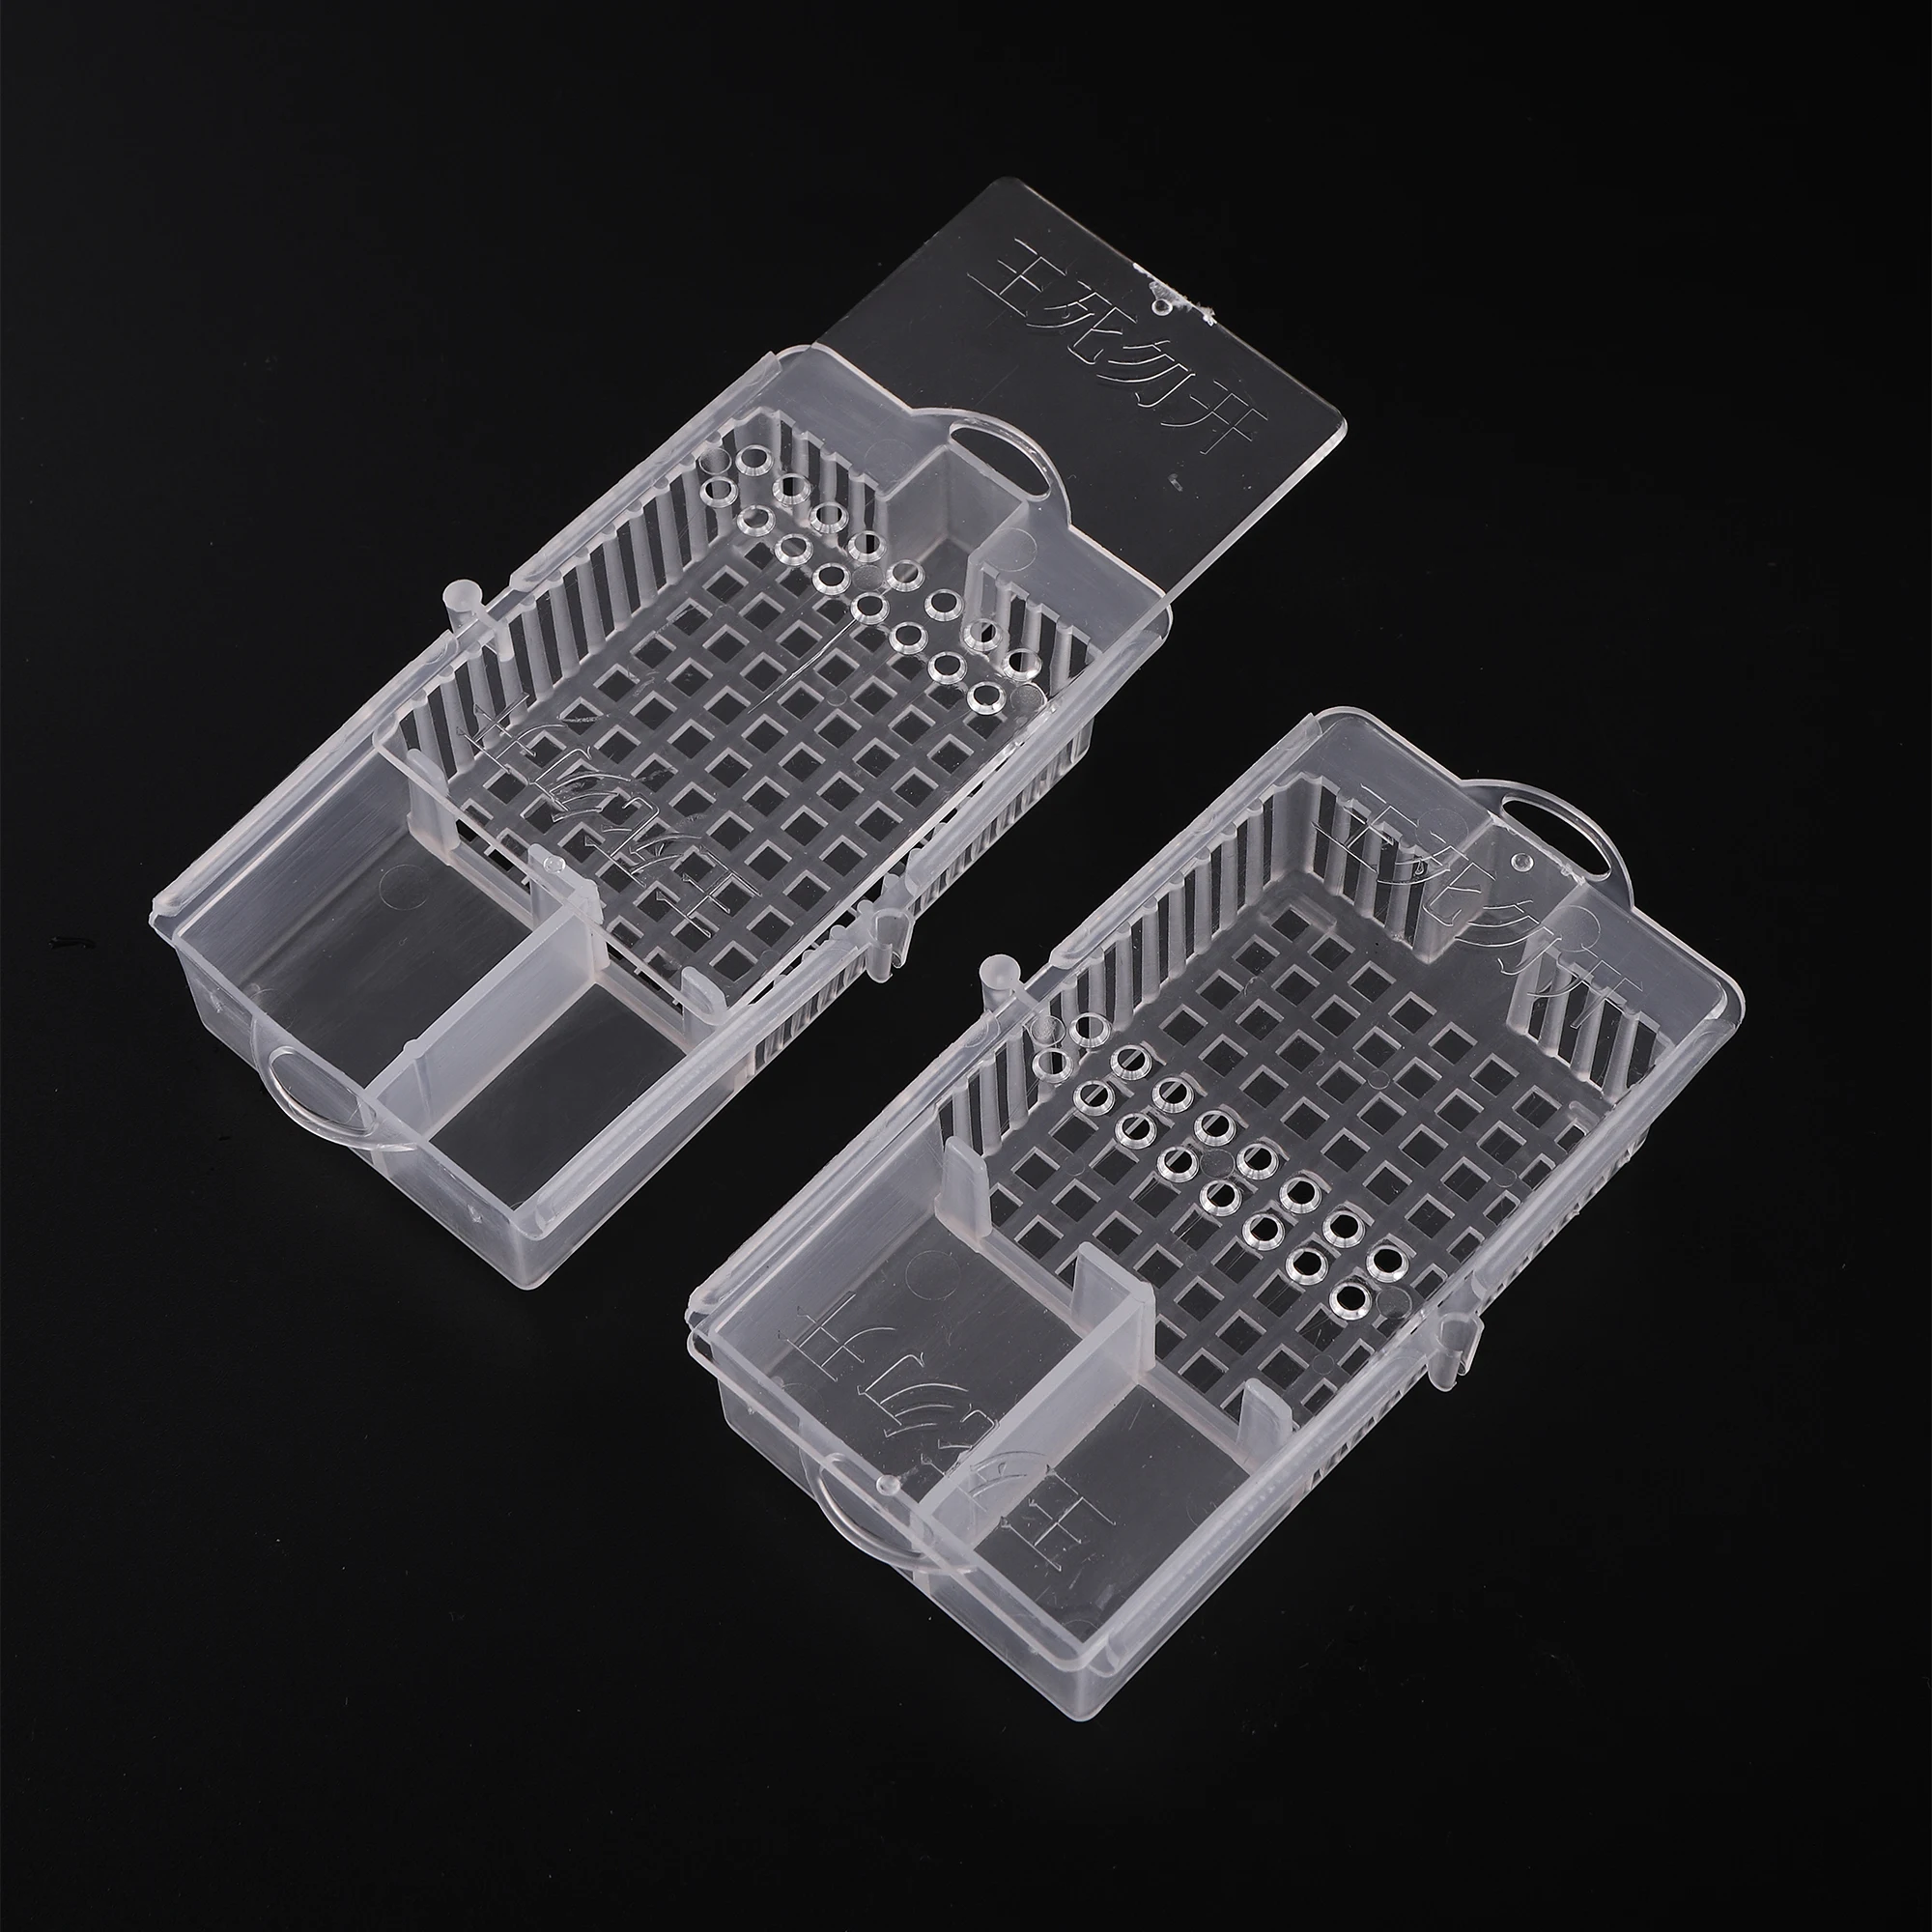 100pcs Beekeeping Transport Cages White Bees Queen Post Room Cage Plastic King Prisoner Queen Bee Cage Apiculture Tools